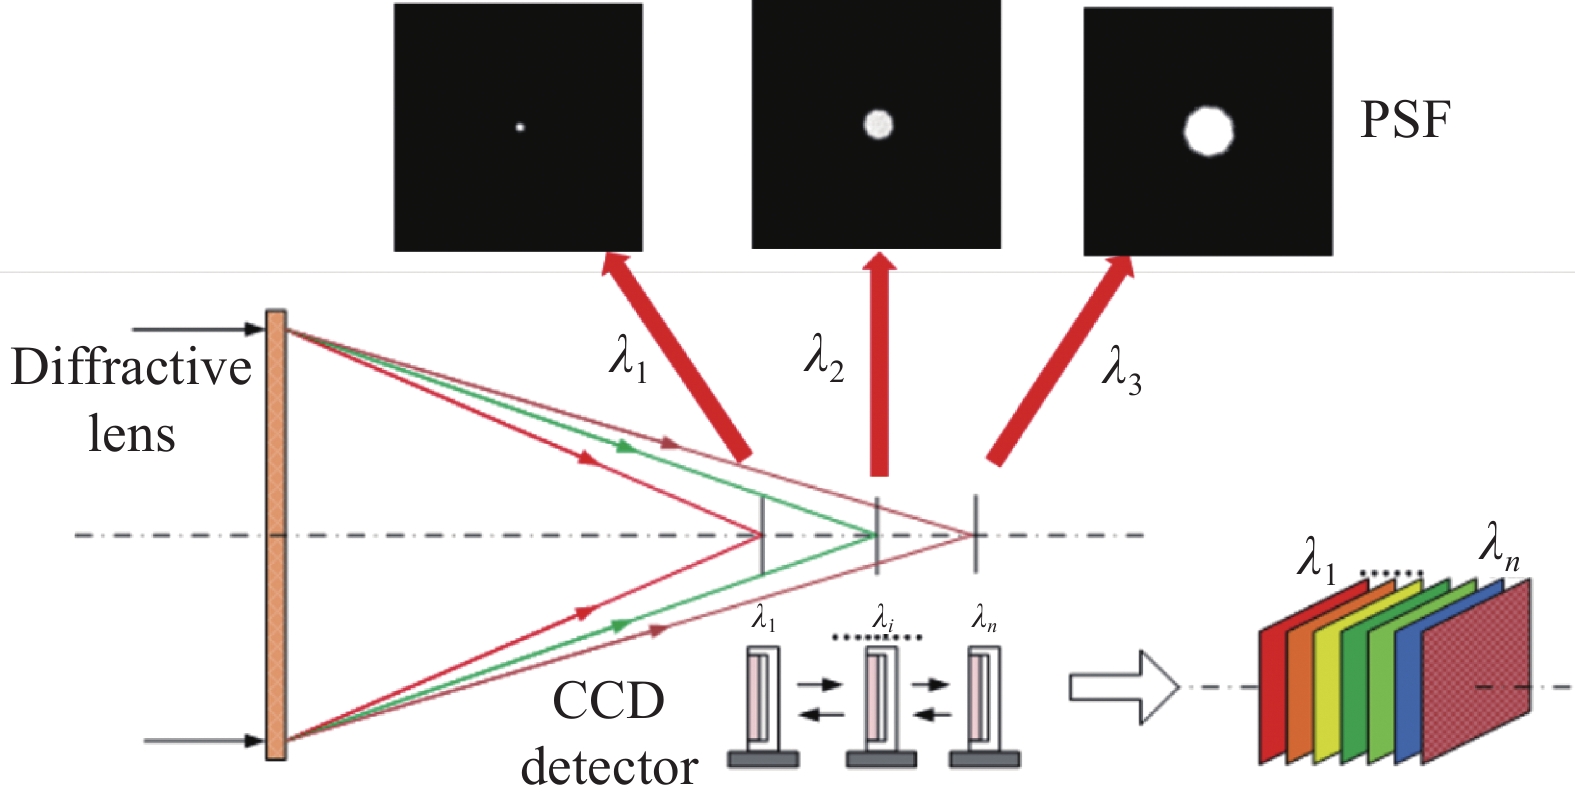 Schematic diagram of diffraction imaging spectrometer system